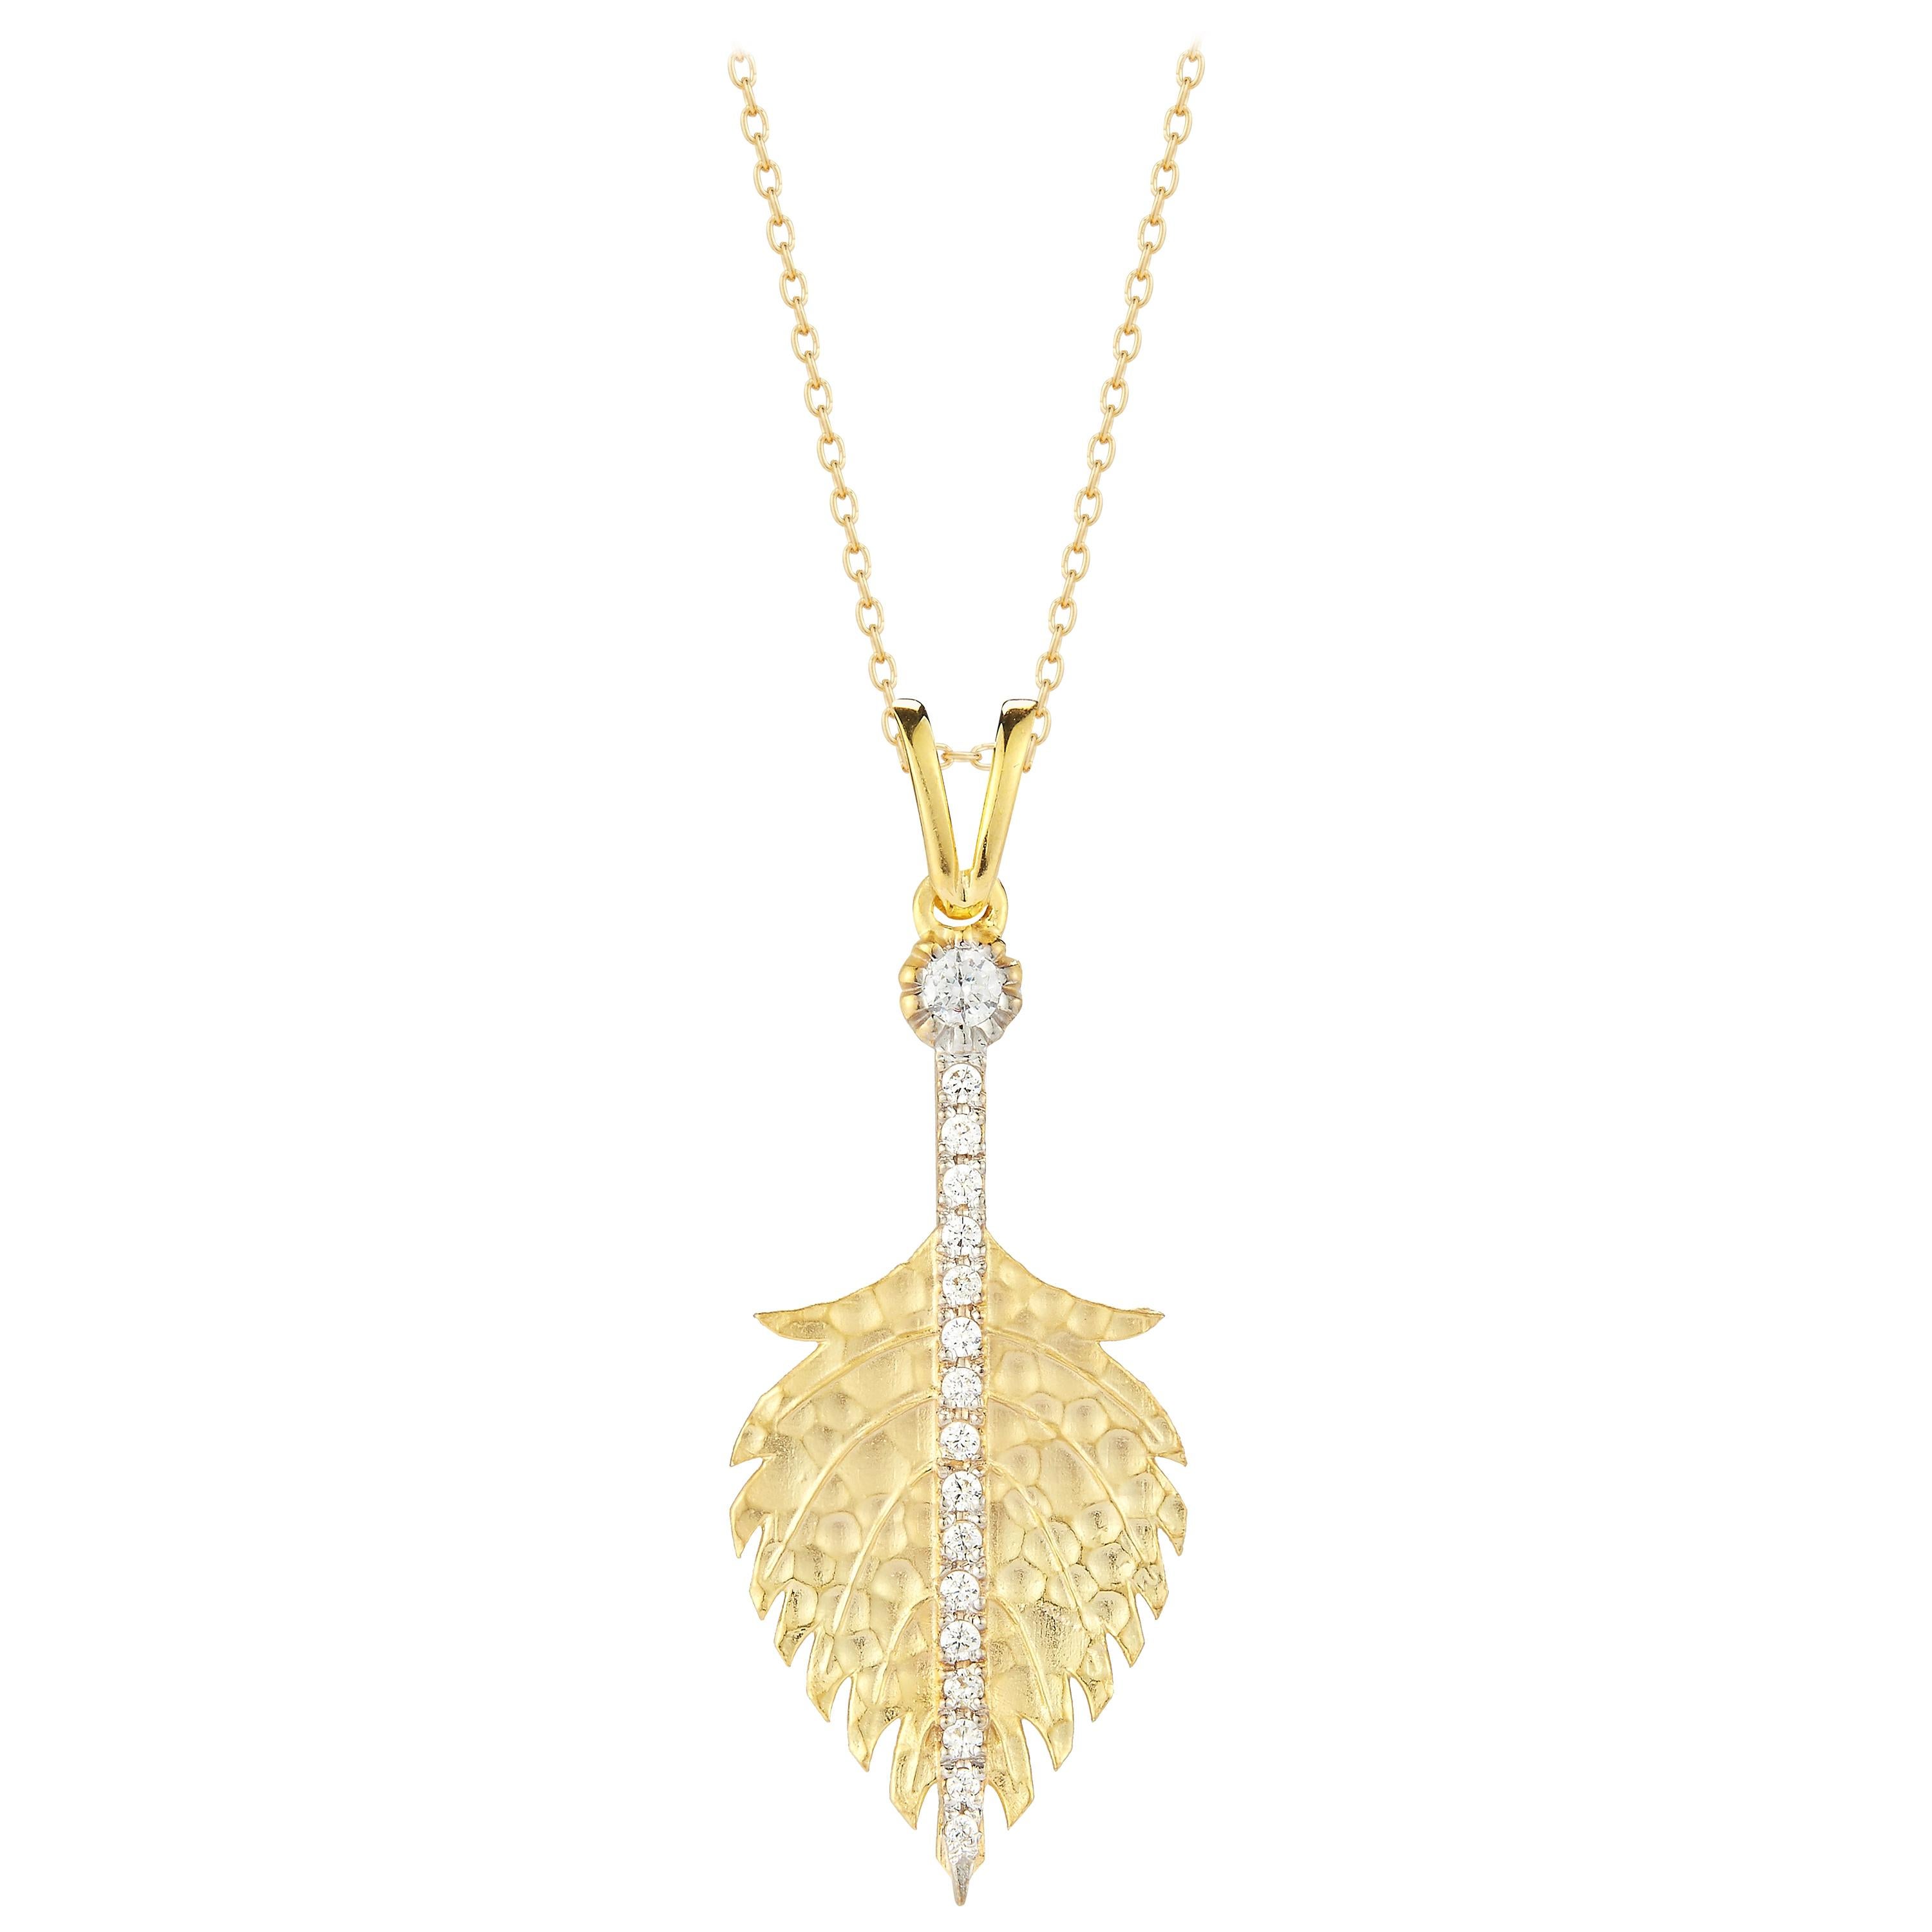 Handcrafted 14 Karat Yellow Gold Hammered Feather Pendant